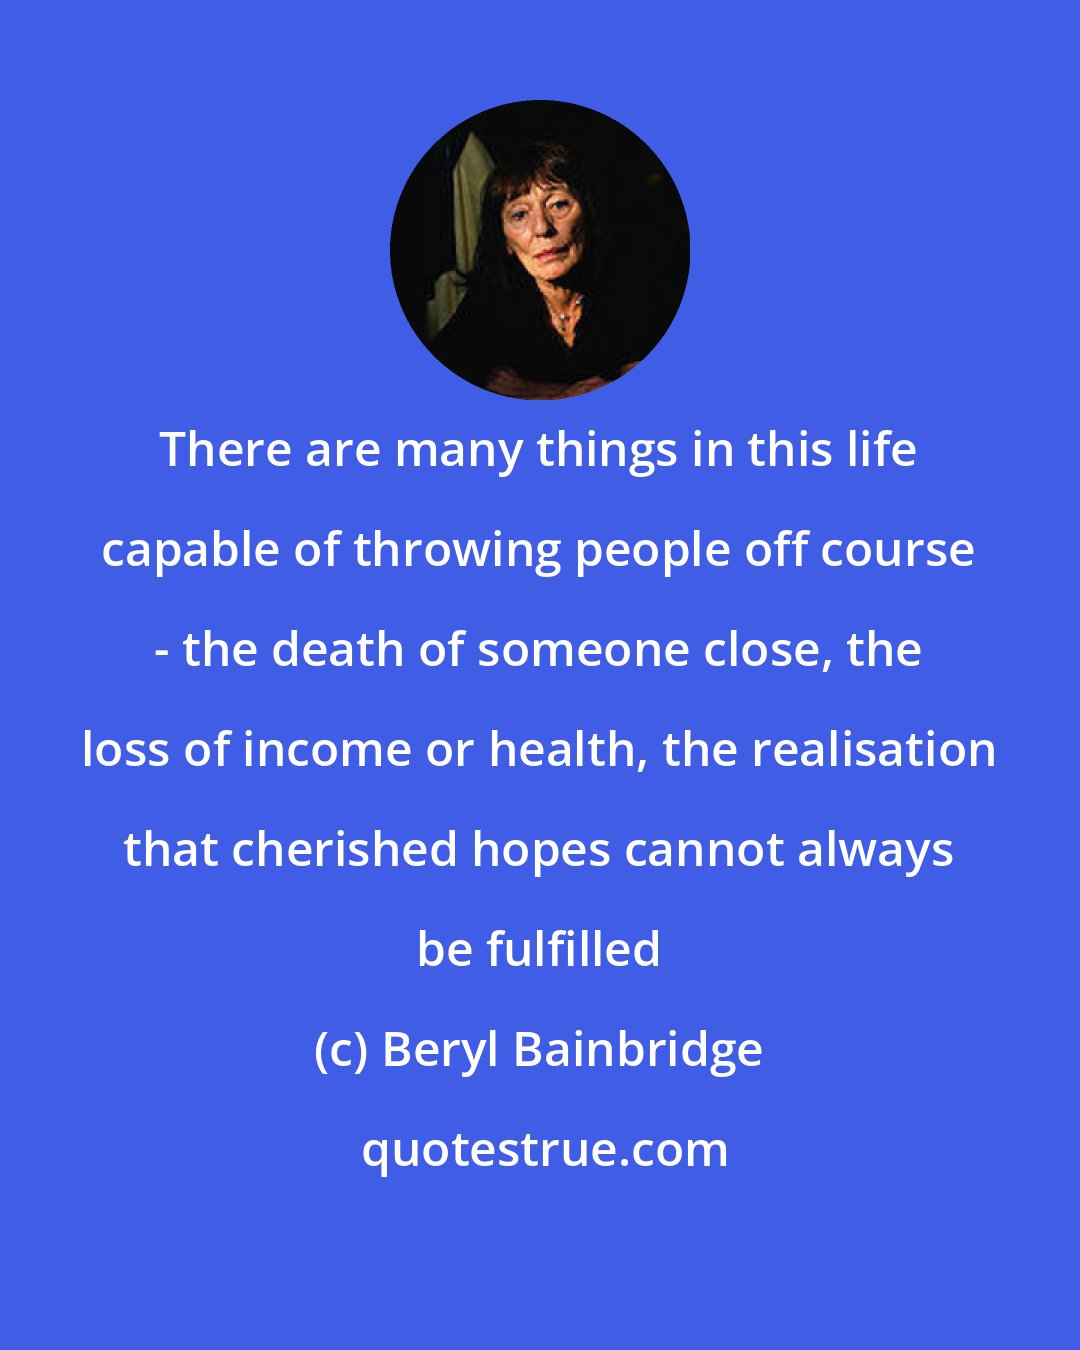 Beryl Bainbridge: There are many things in this life capable of throwing people off course - the death of someone close, the loss of income or health, the realisation that cherished hopes cannot always be fulfilled